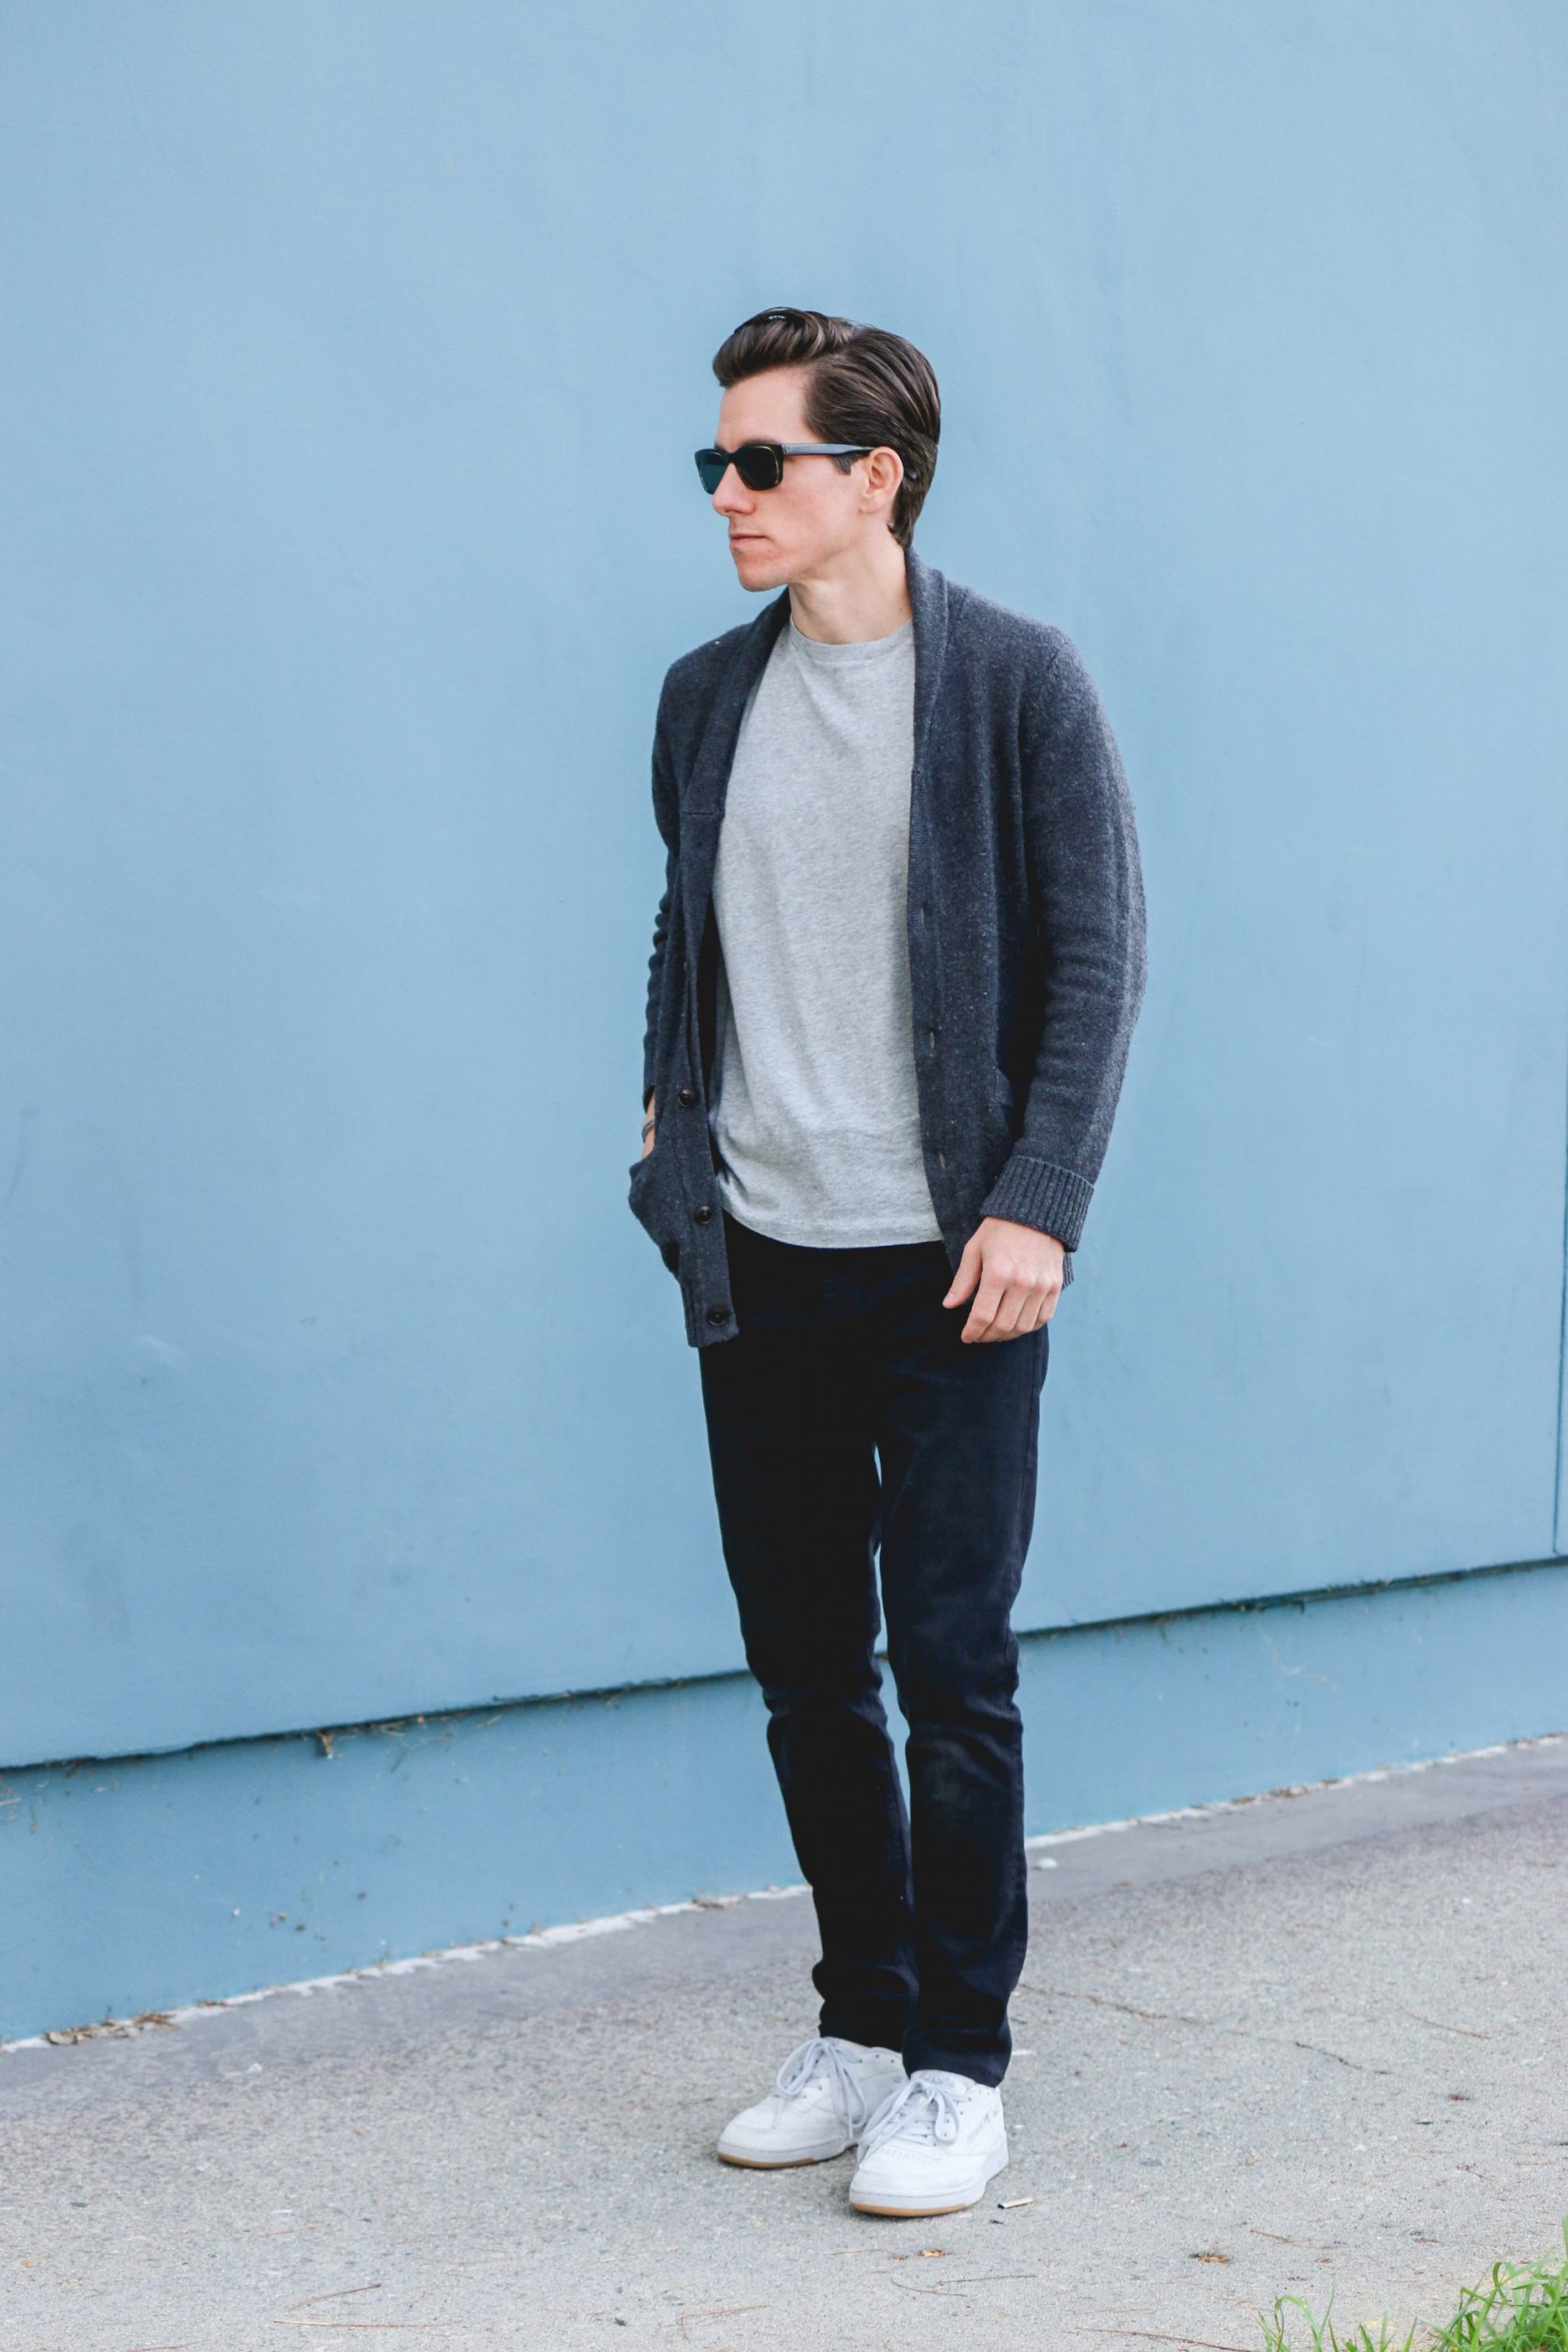 How to Wear a Cardigan: 11 Outfit Ideas for Guys - The Modest Man